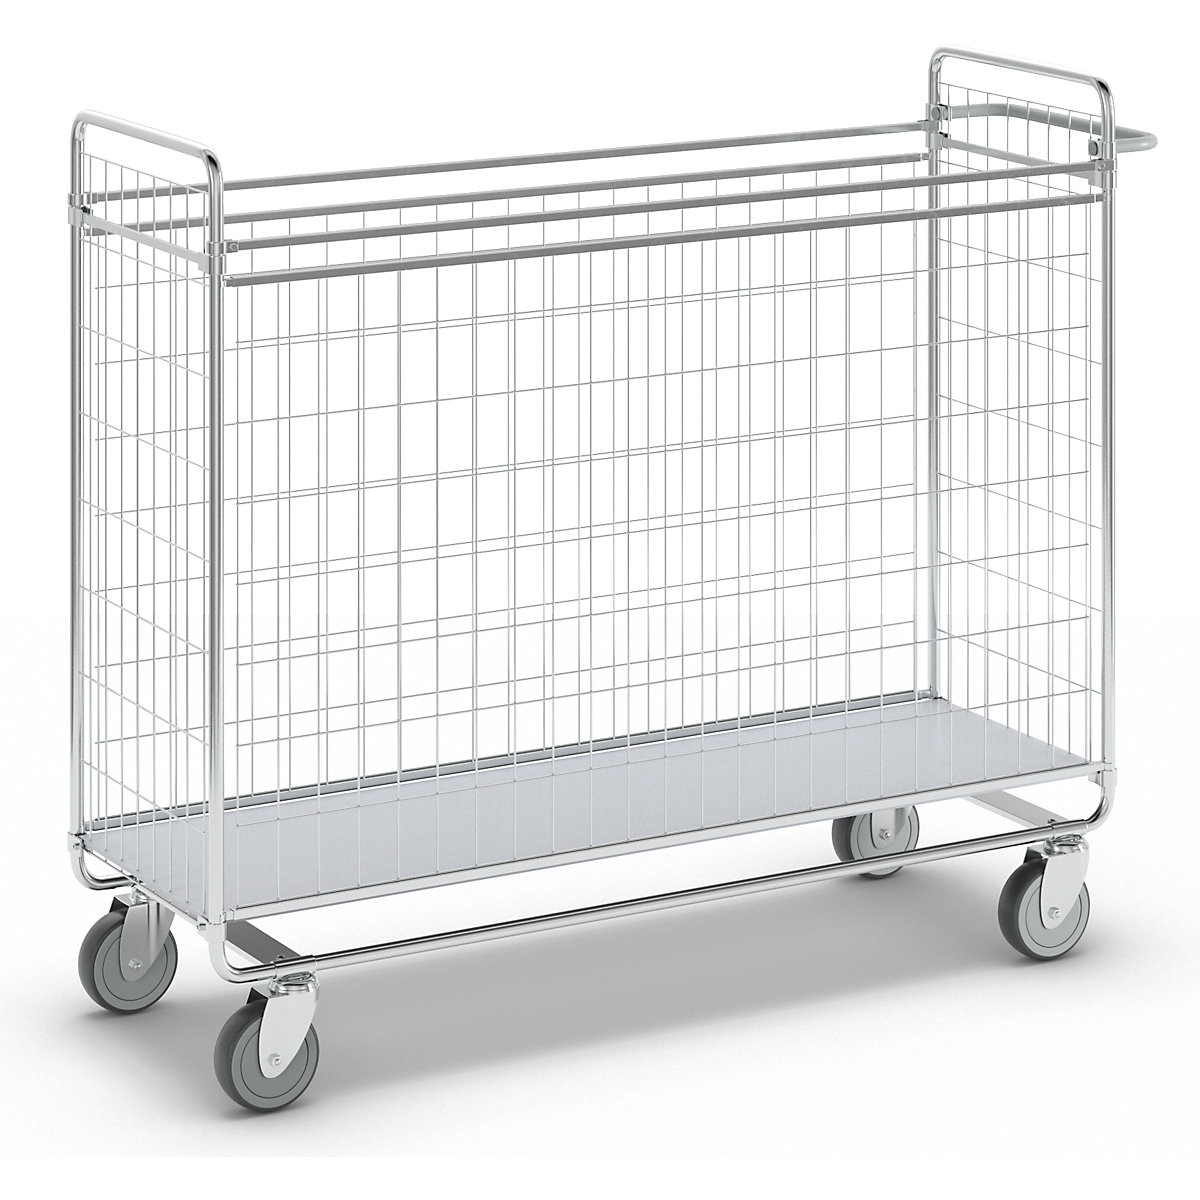 SERIES 100 four-sided trolley – HelgeNyberg, max. load 100 kg, LxWxH 1380 x 460 x 1120 mm-4